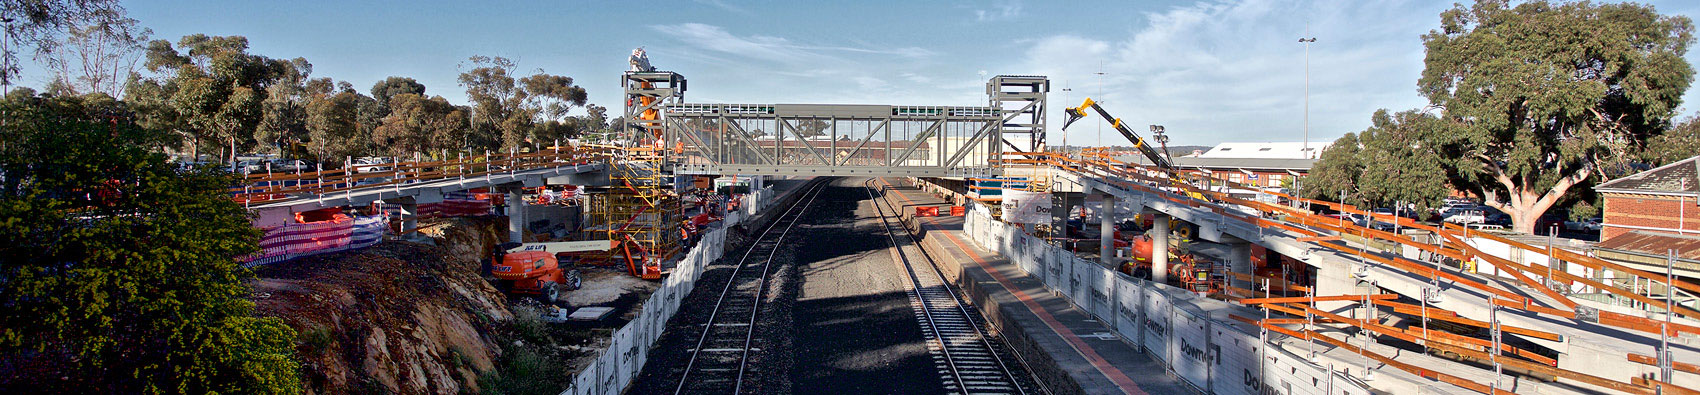 Railway tracks near a train station. An overpass is being built and there is construction works taking place on both sides of the tracks.